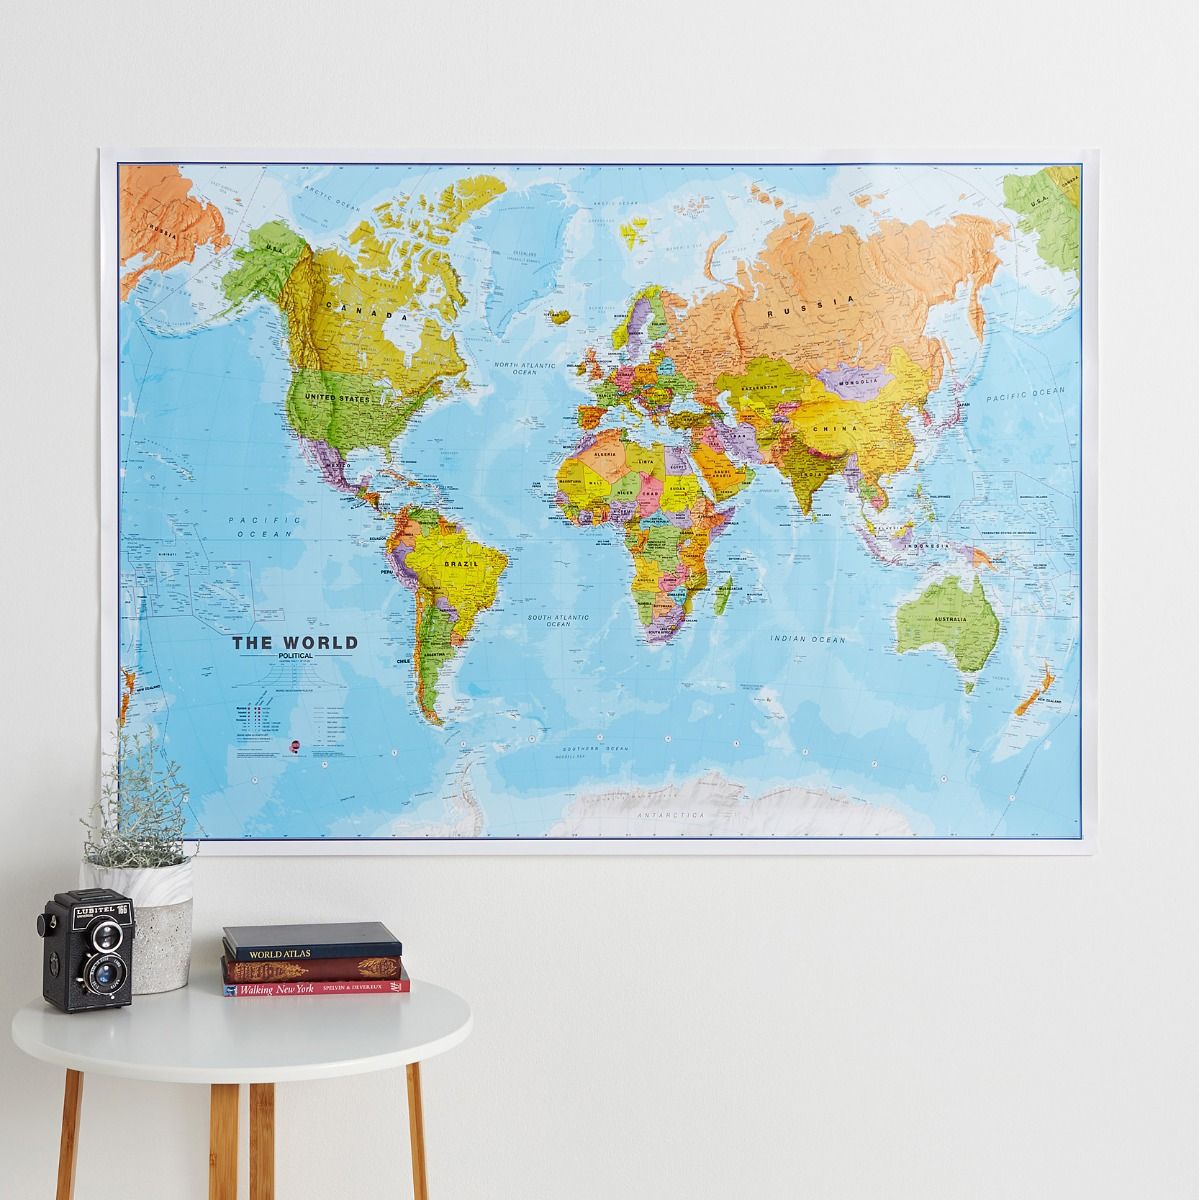 London Laminated Wall Map Laminated Wall Maps Of The World | The Best ...